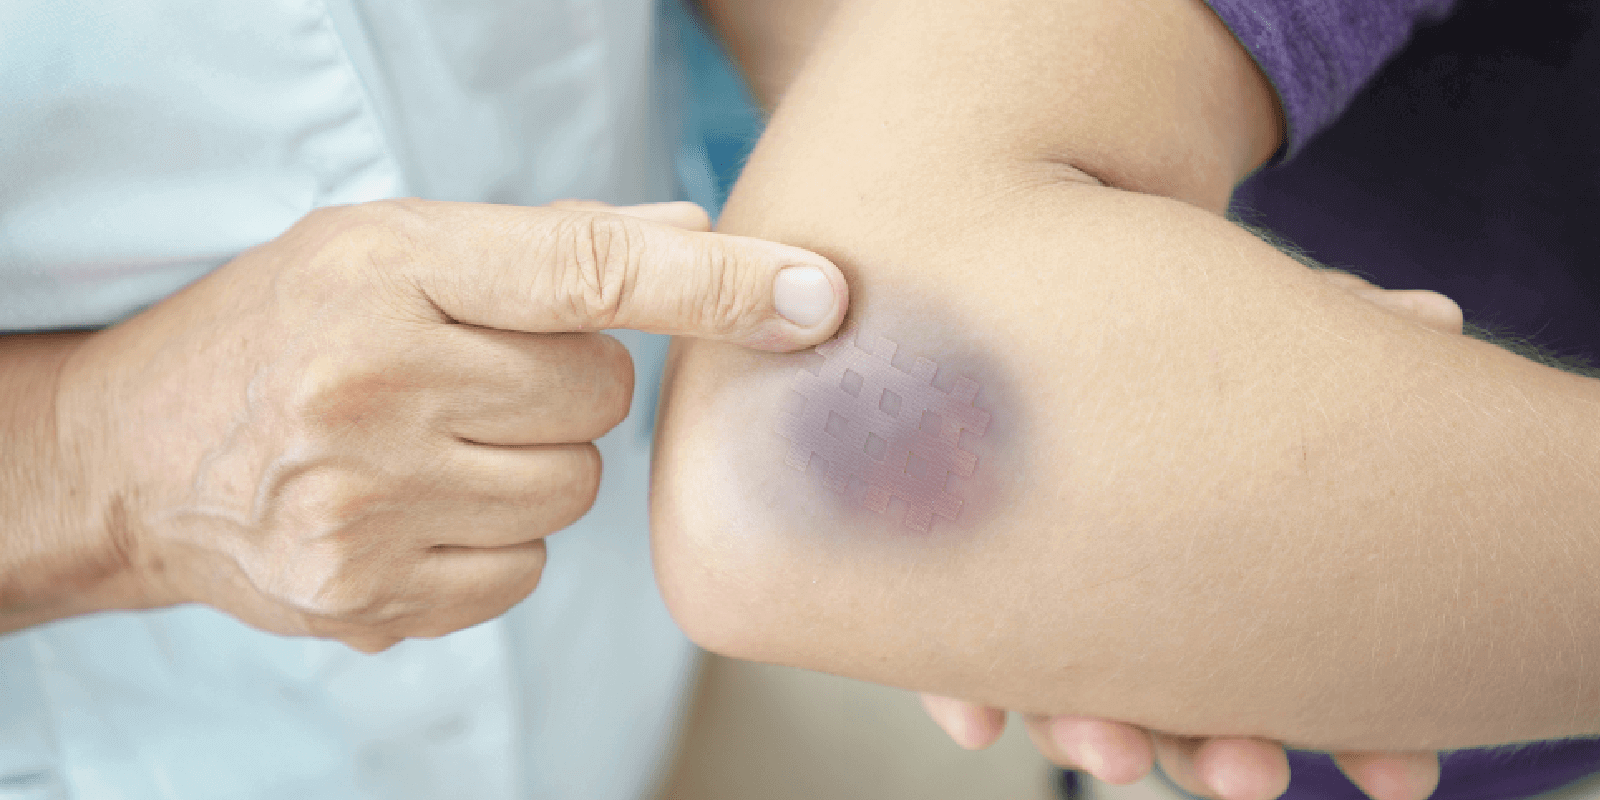 First Aid Guide: Dealing with Bruising